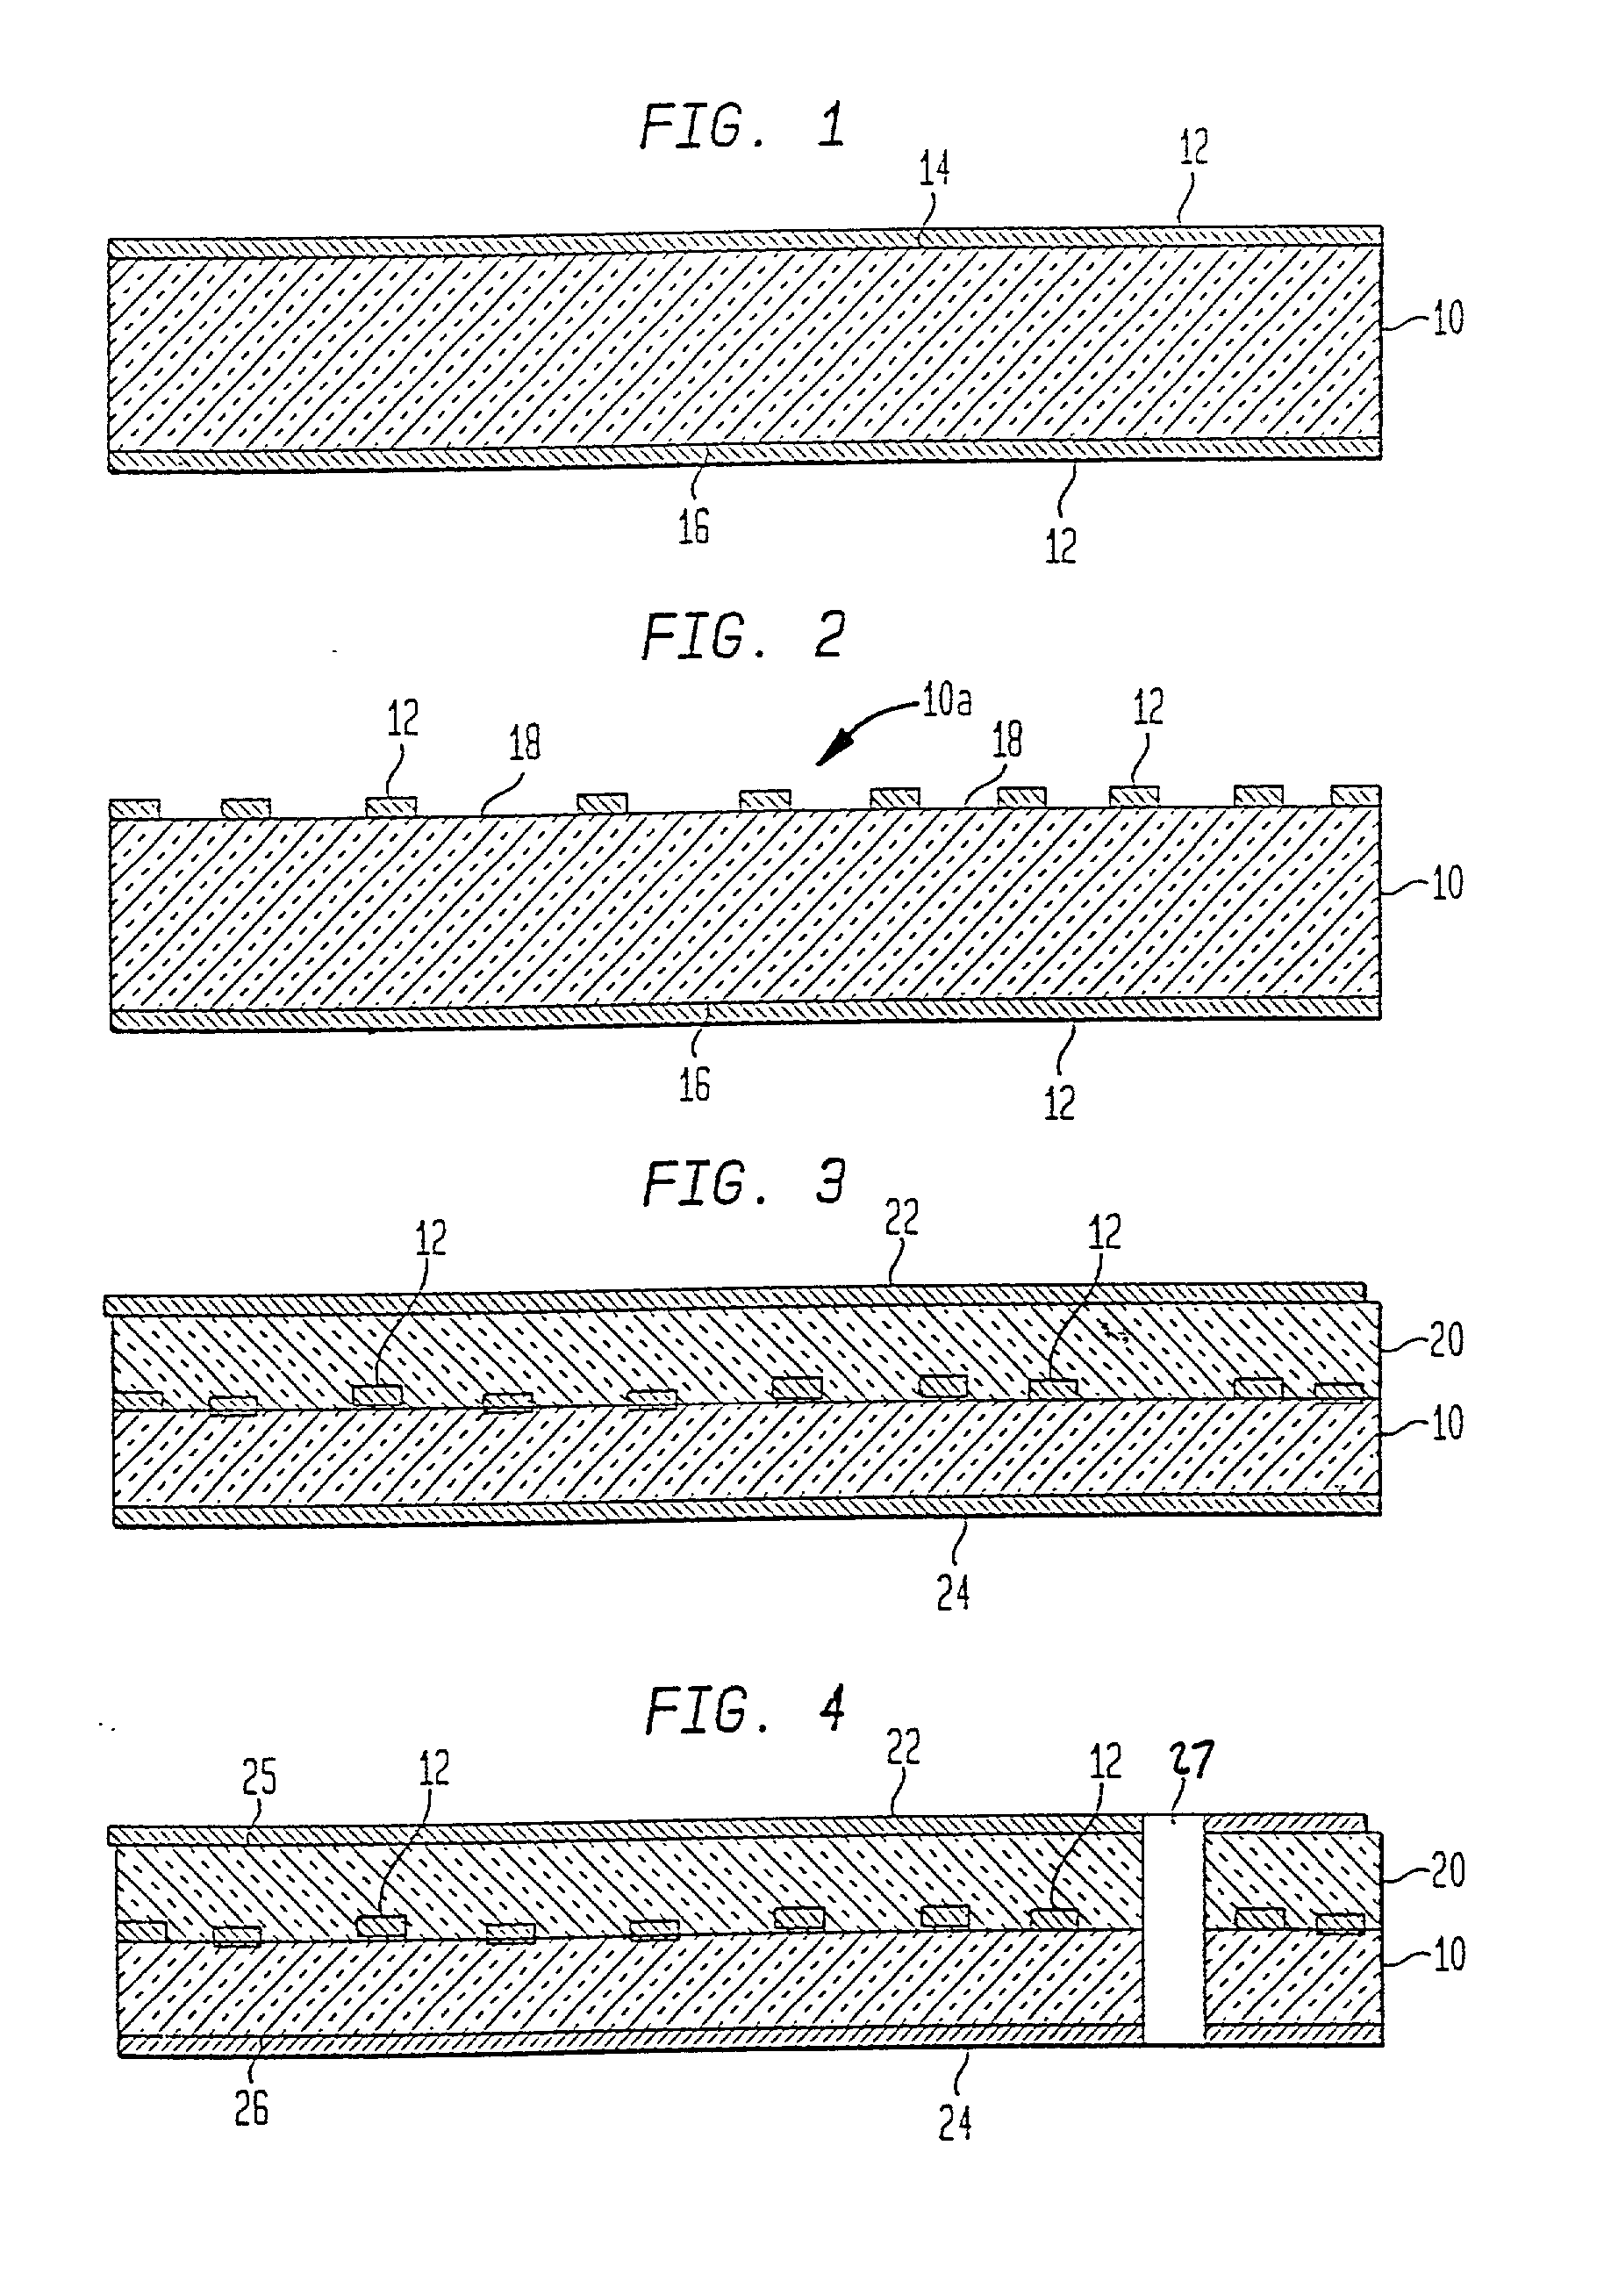 Structure for high speed printed wiring boards with multiple differential impedance-controlled layer